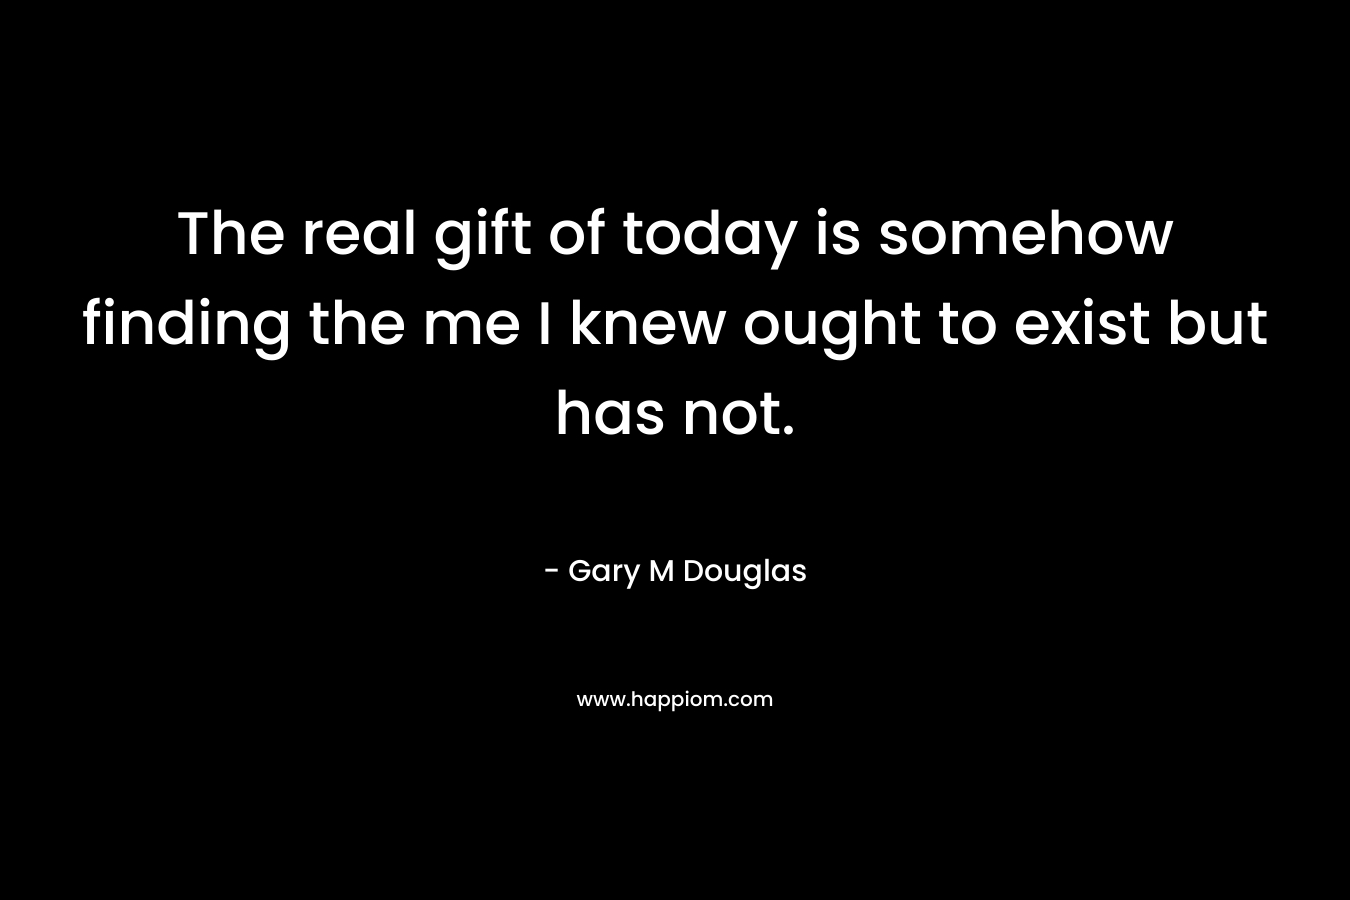 The real gift of today is somehow finding the me I knew ought to exist but has not.